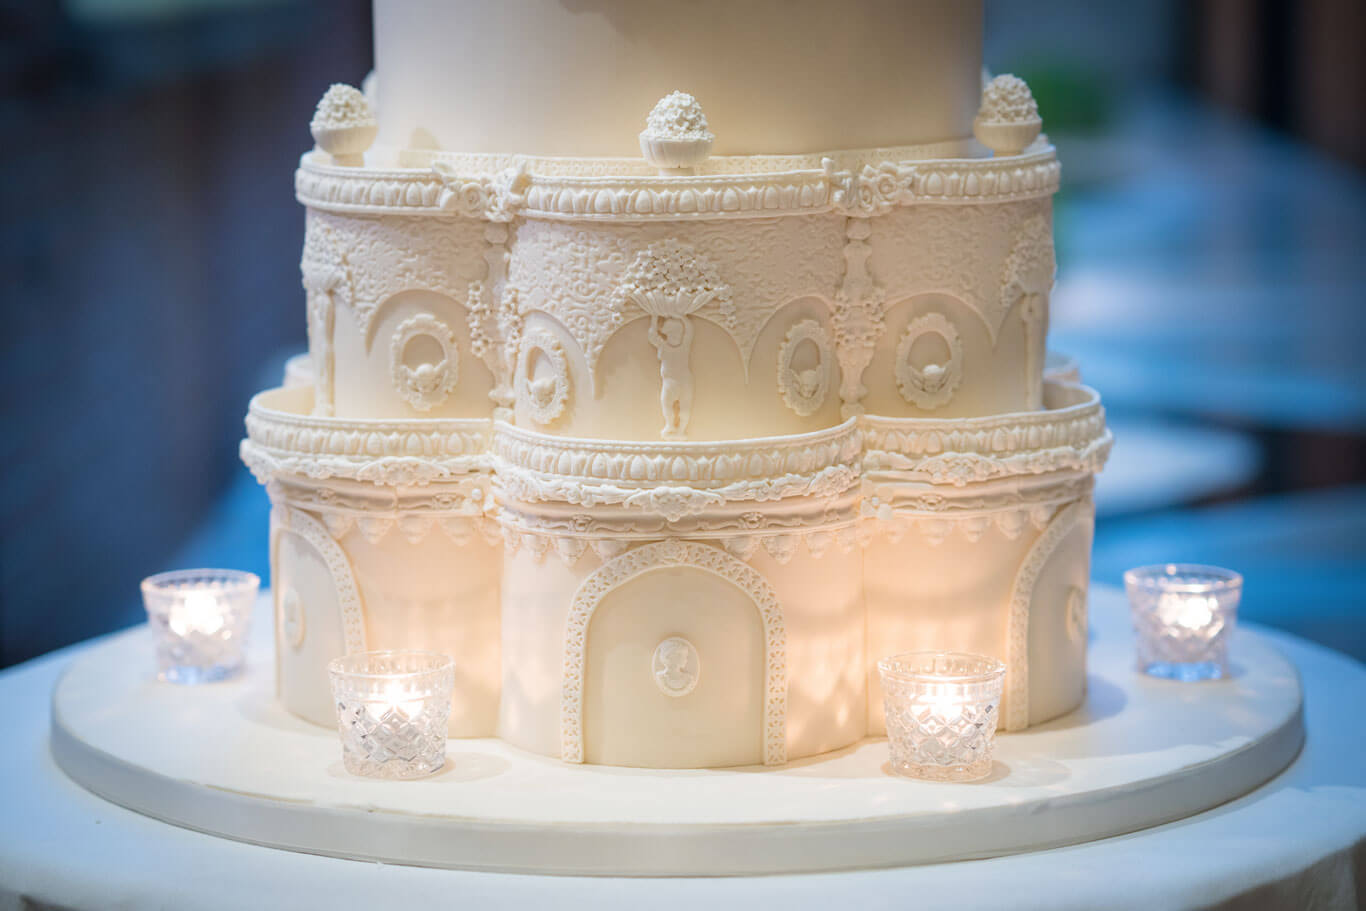 close up details of intricate icing on the base of a bespoke wedding cake